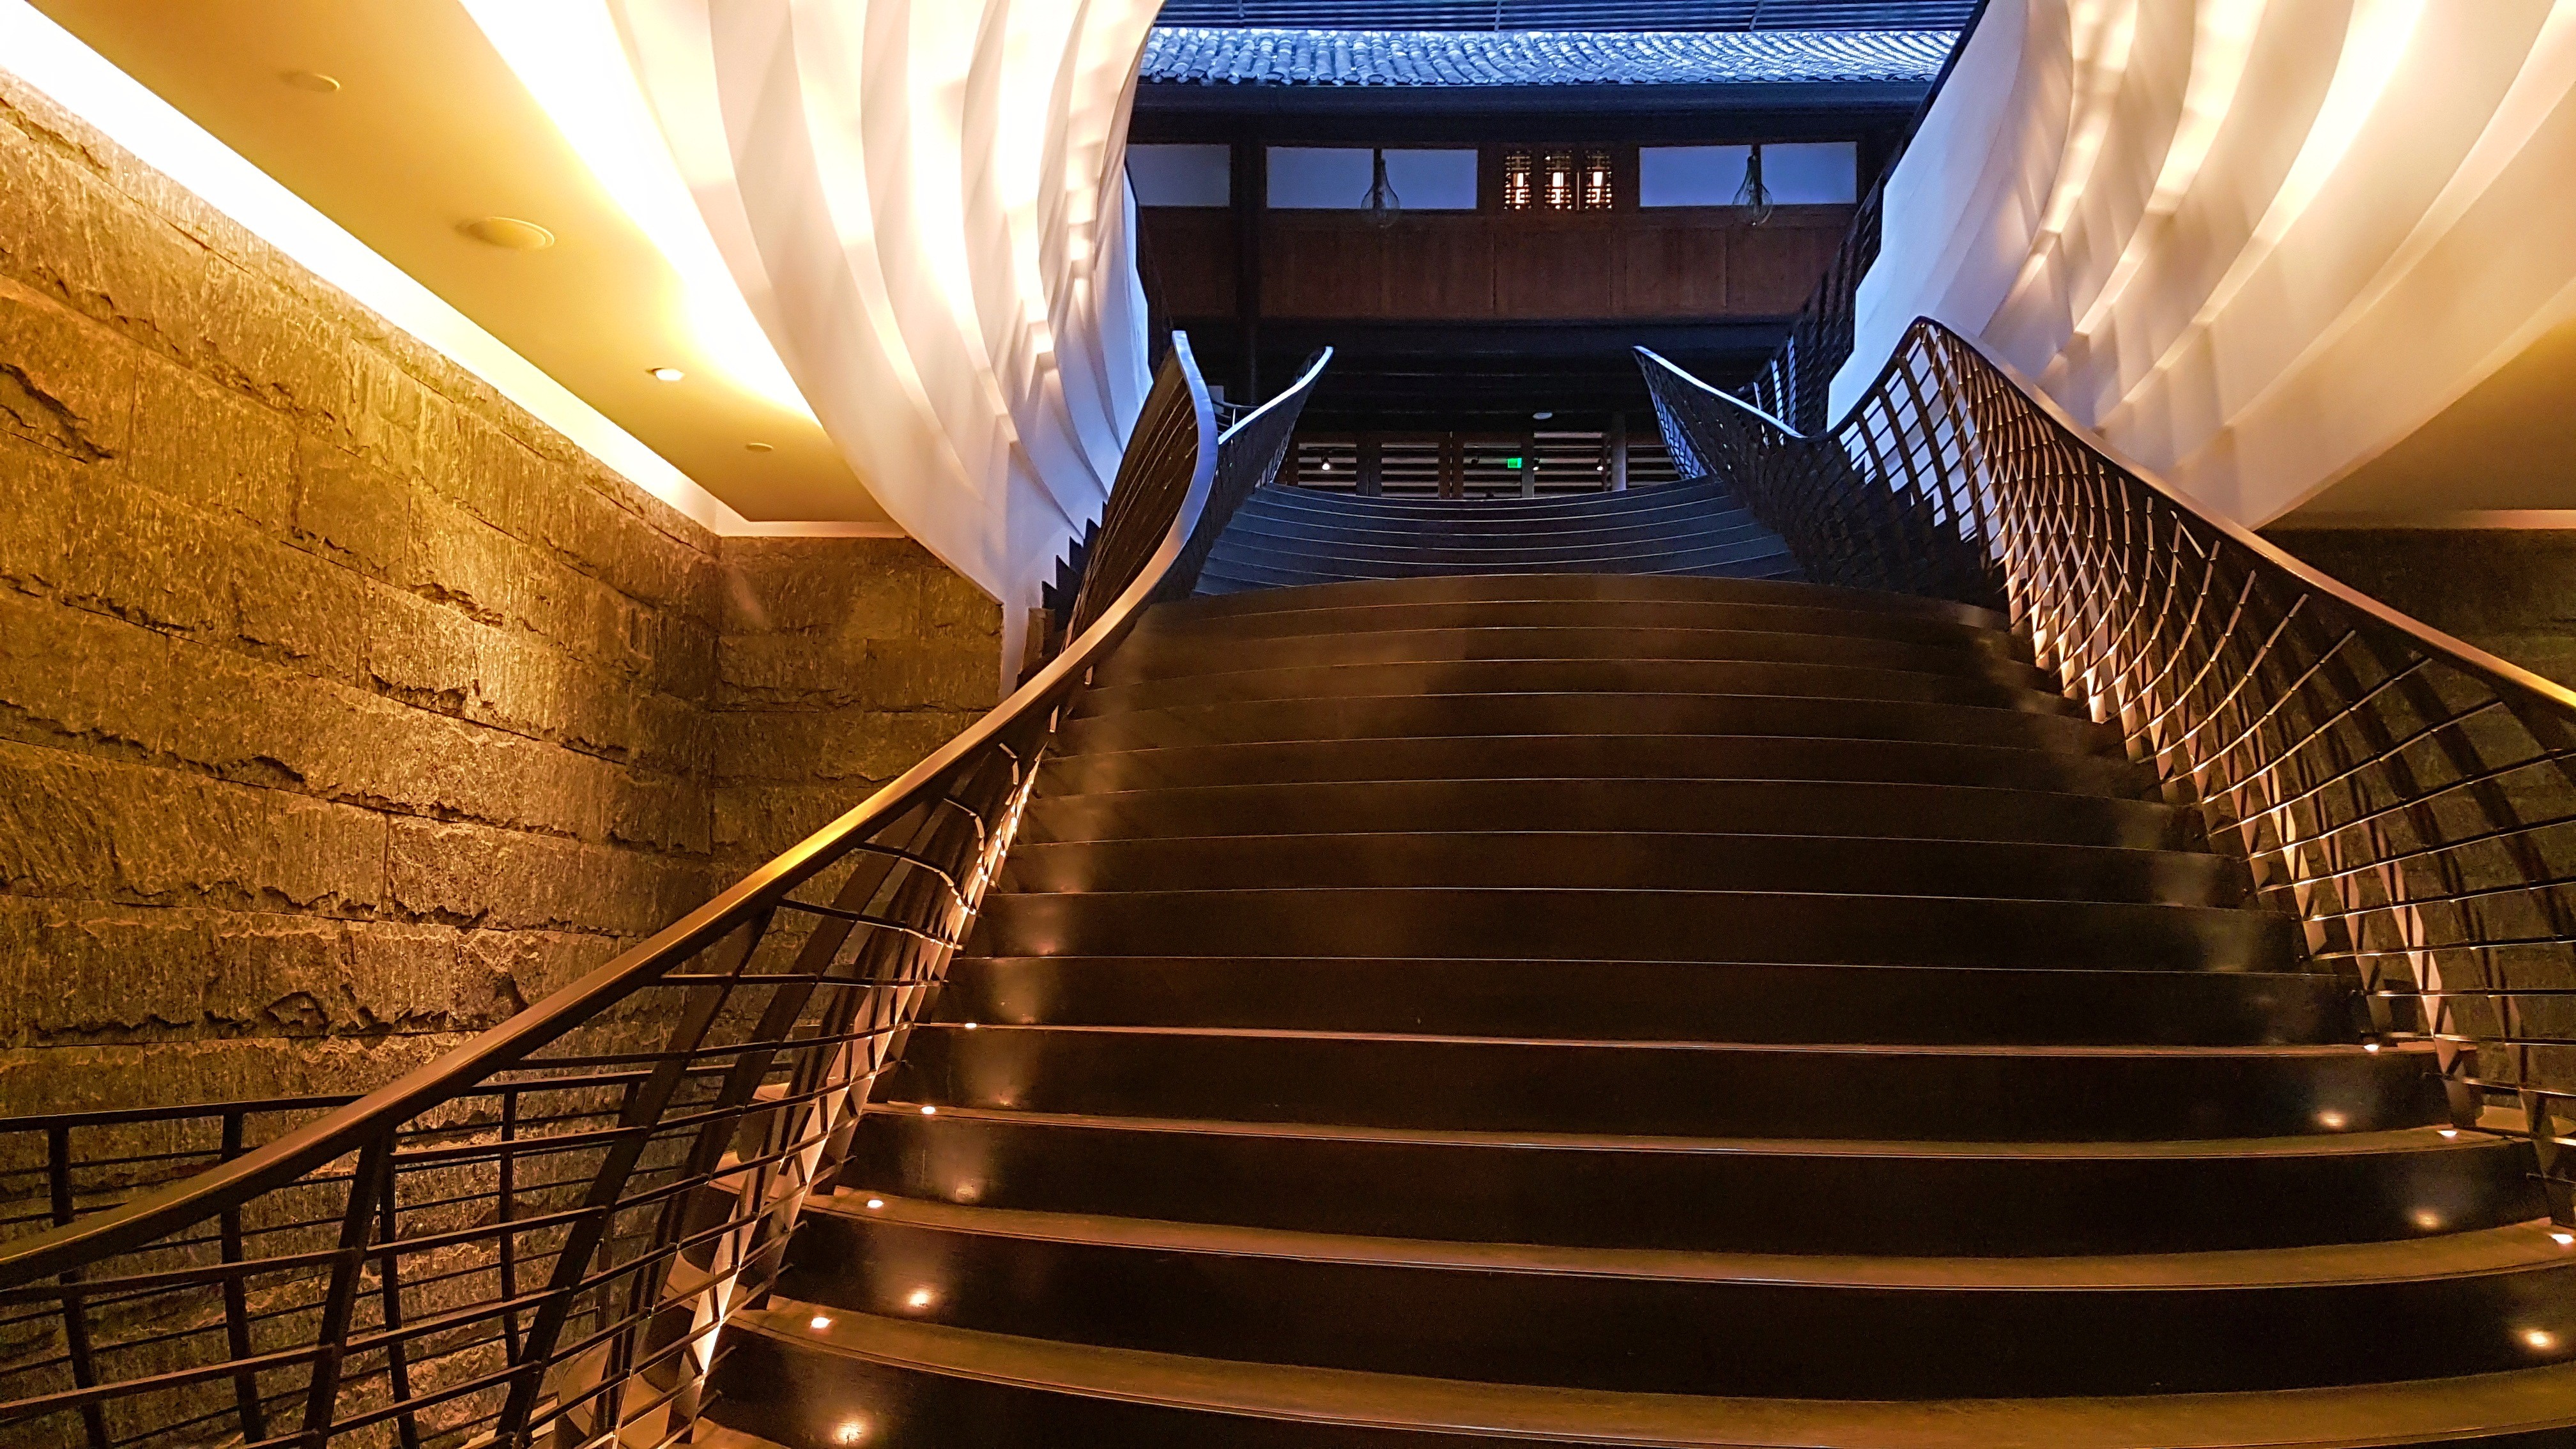 A sweeping staircase at Chengdu’s The Temple House, a hotel which blends traditional and modern design.